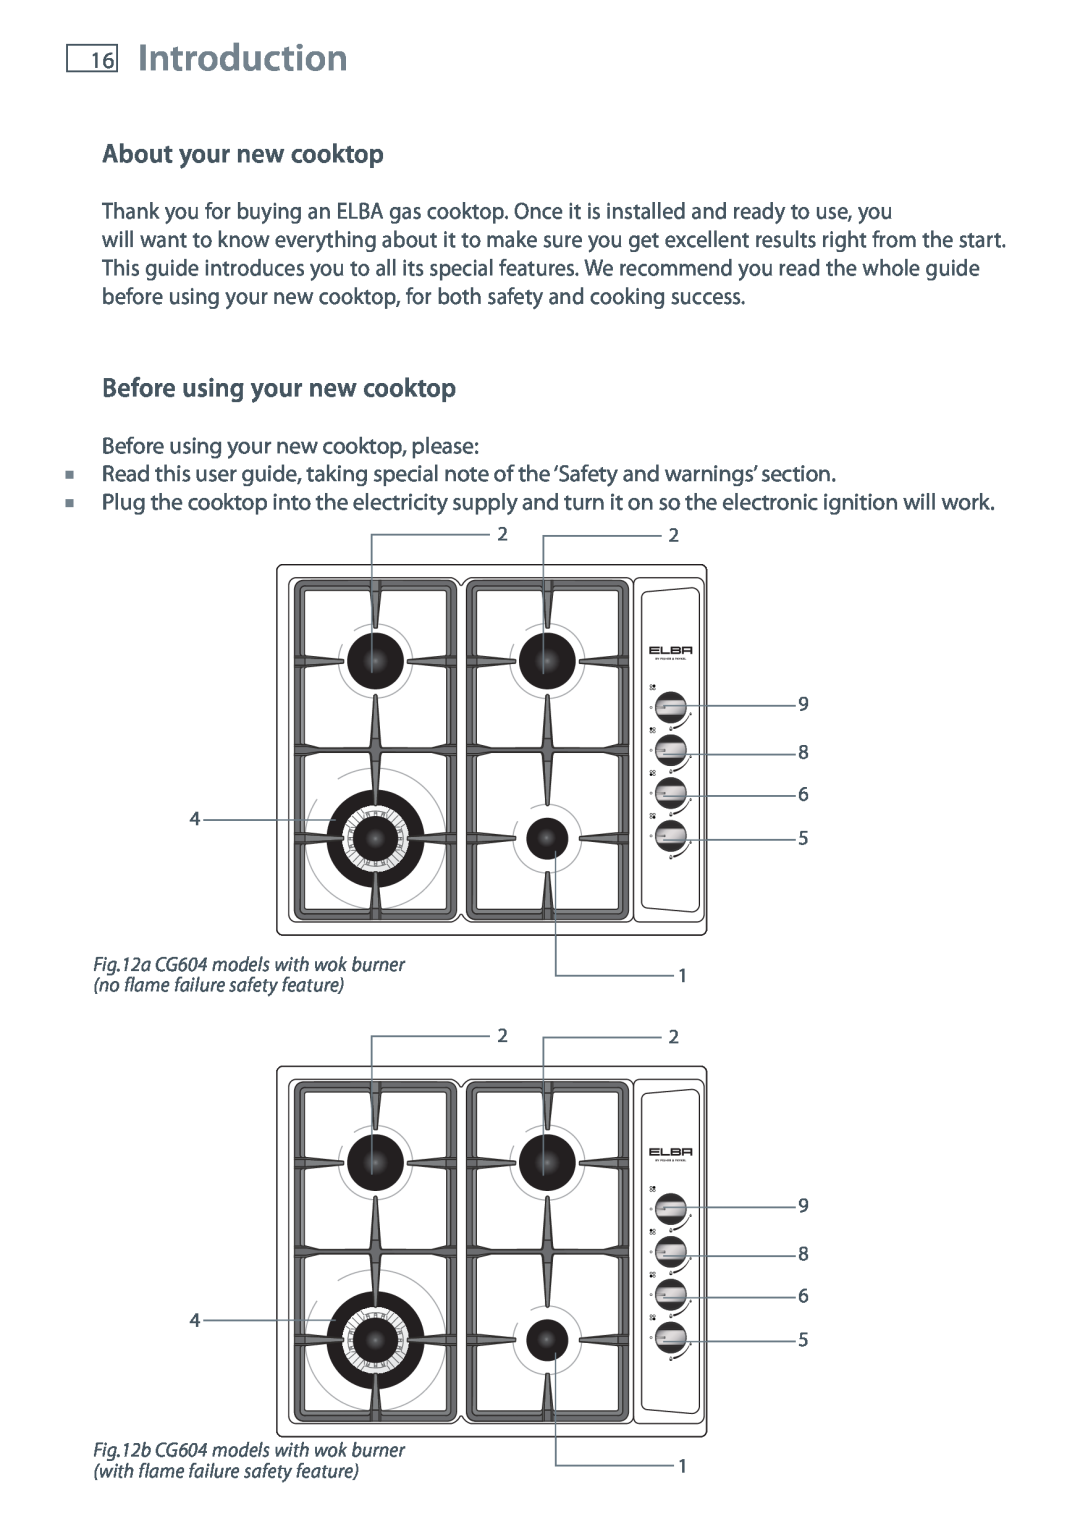 Fisher & Paykel CG604, CG905 installation instructions Introduction, About your new cooktop, Before using your new cooktop 